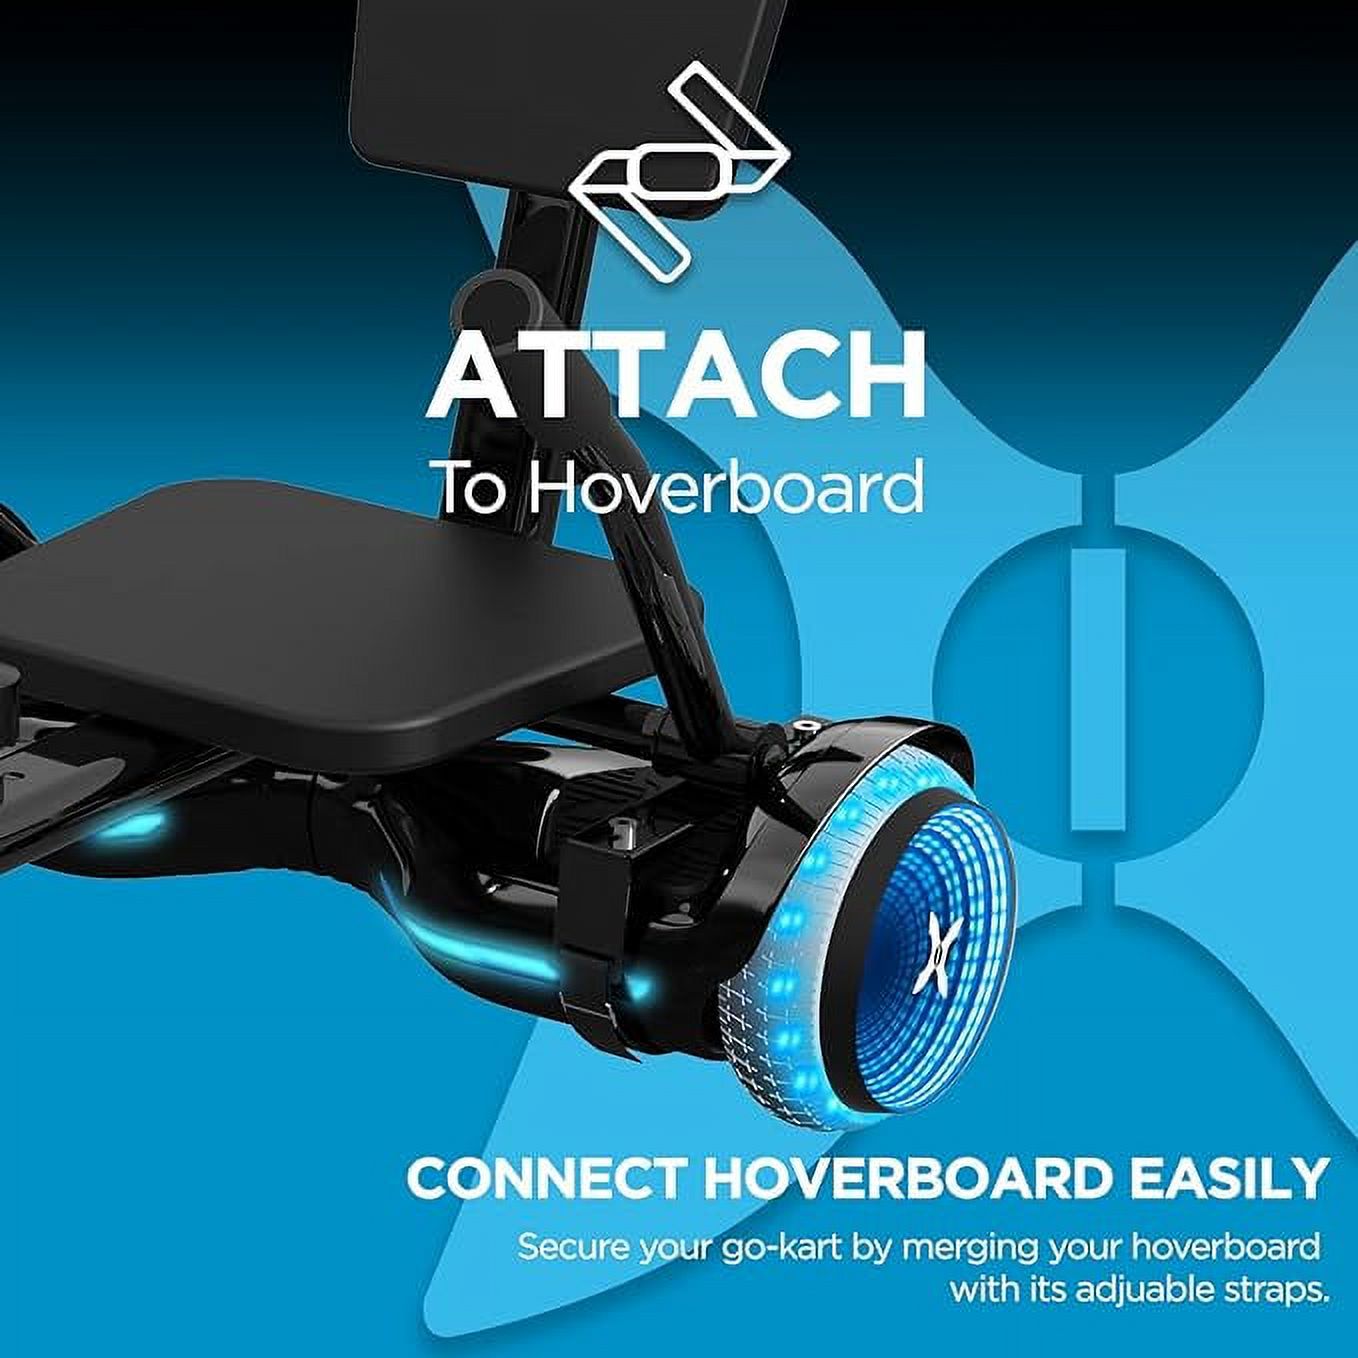 Hover-1 Turbo Hoverboard and Kart Combo, Infinity LED Wheels, Black - image 5 of 8